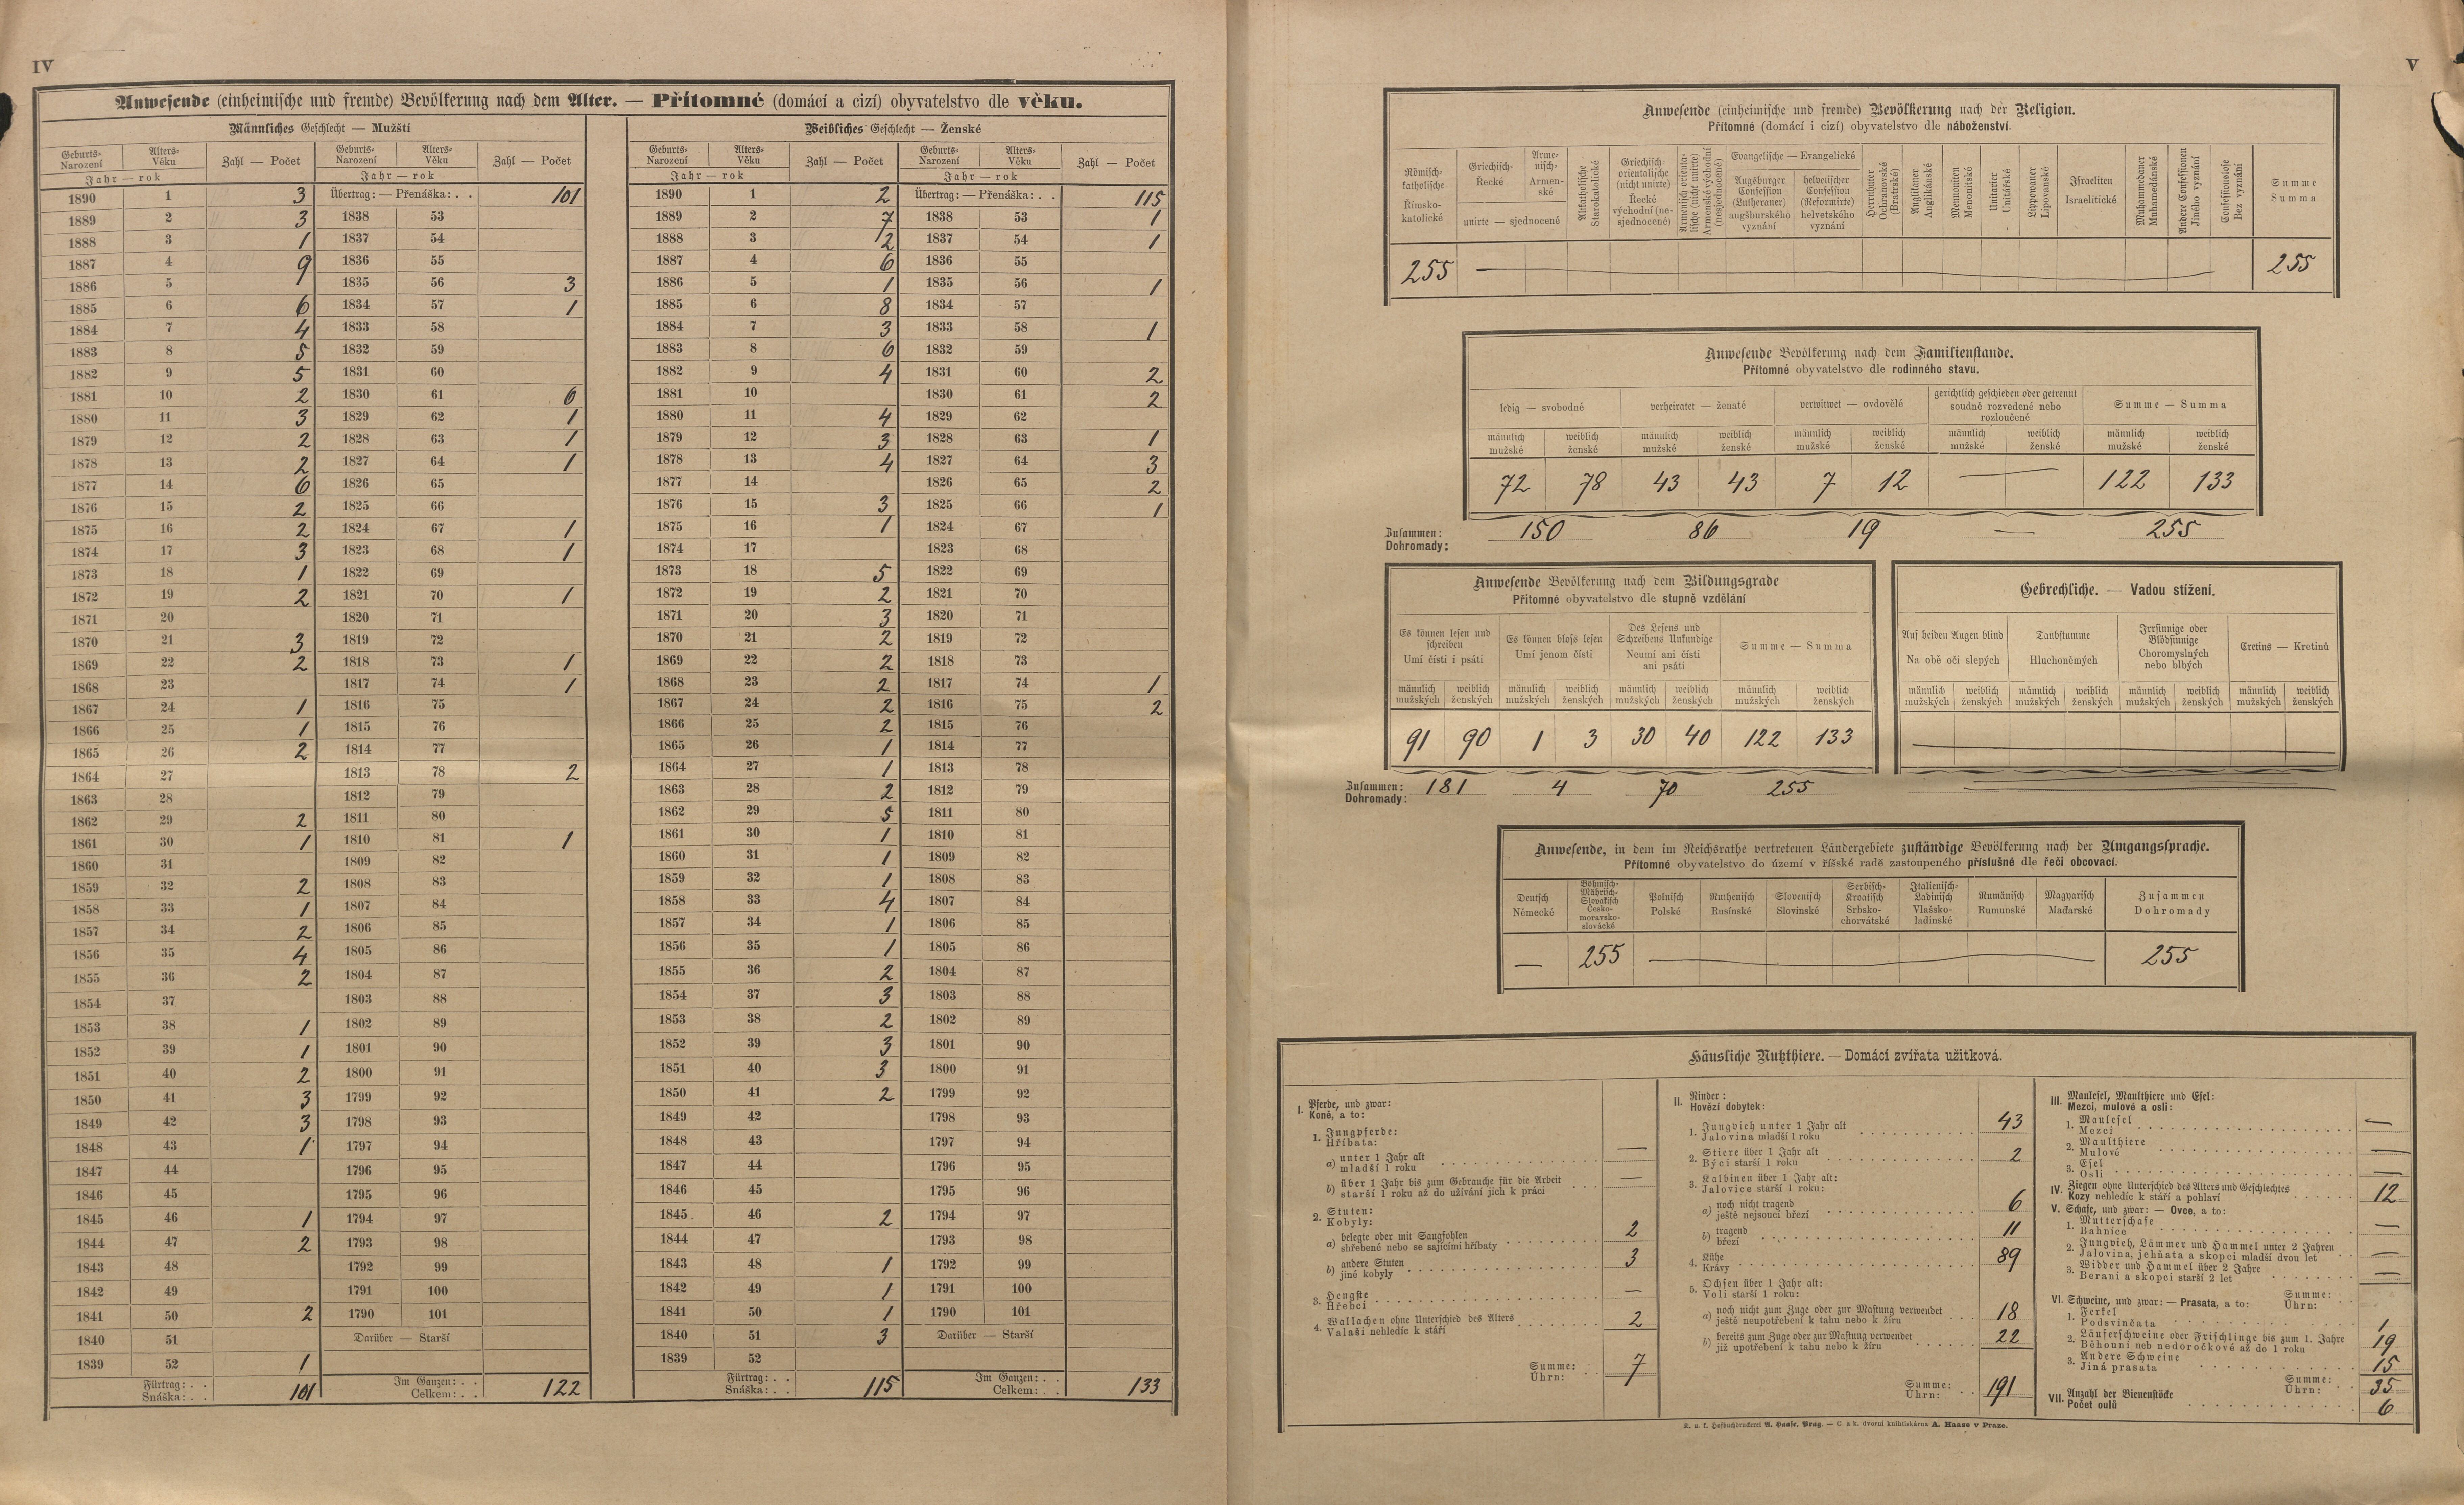 15. soap-kt_01159_census-sum-1890-luby_0150